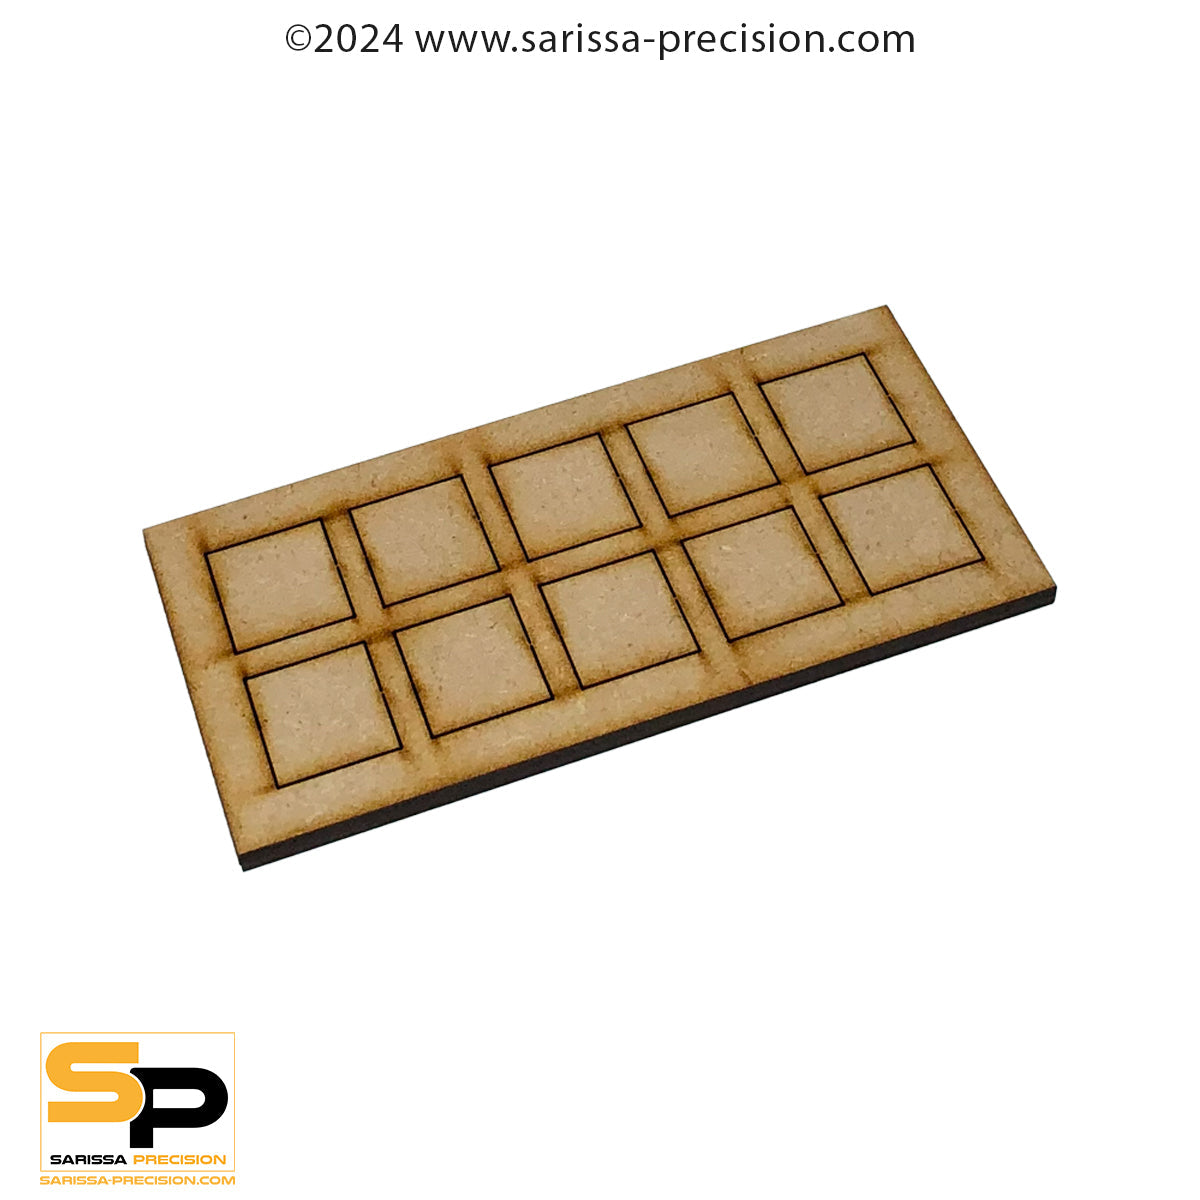 10 x 10 25x25mm Conversion Tray for 20x20mm bases